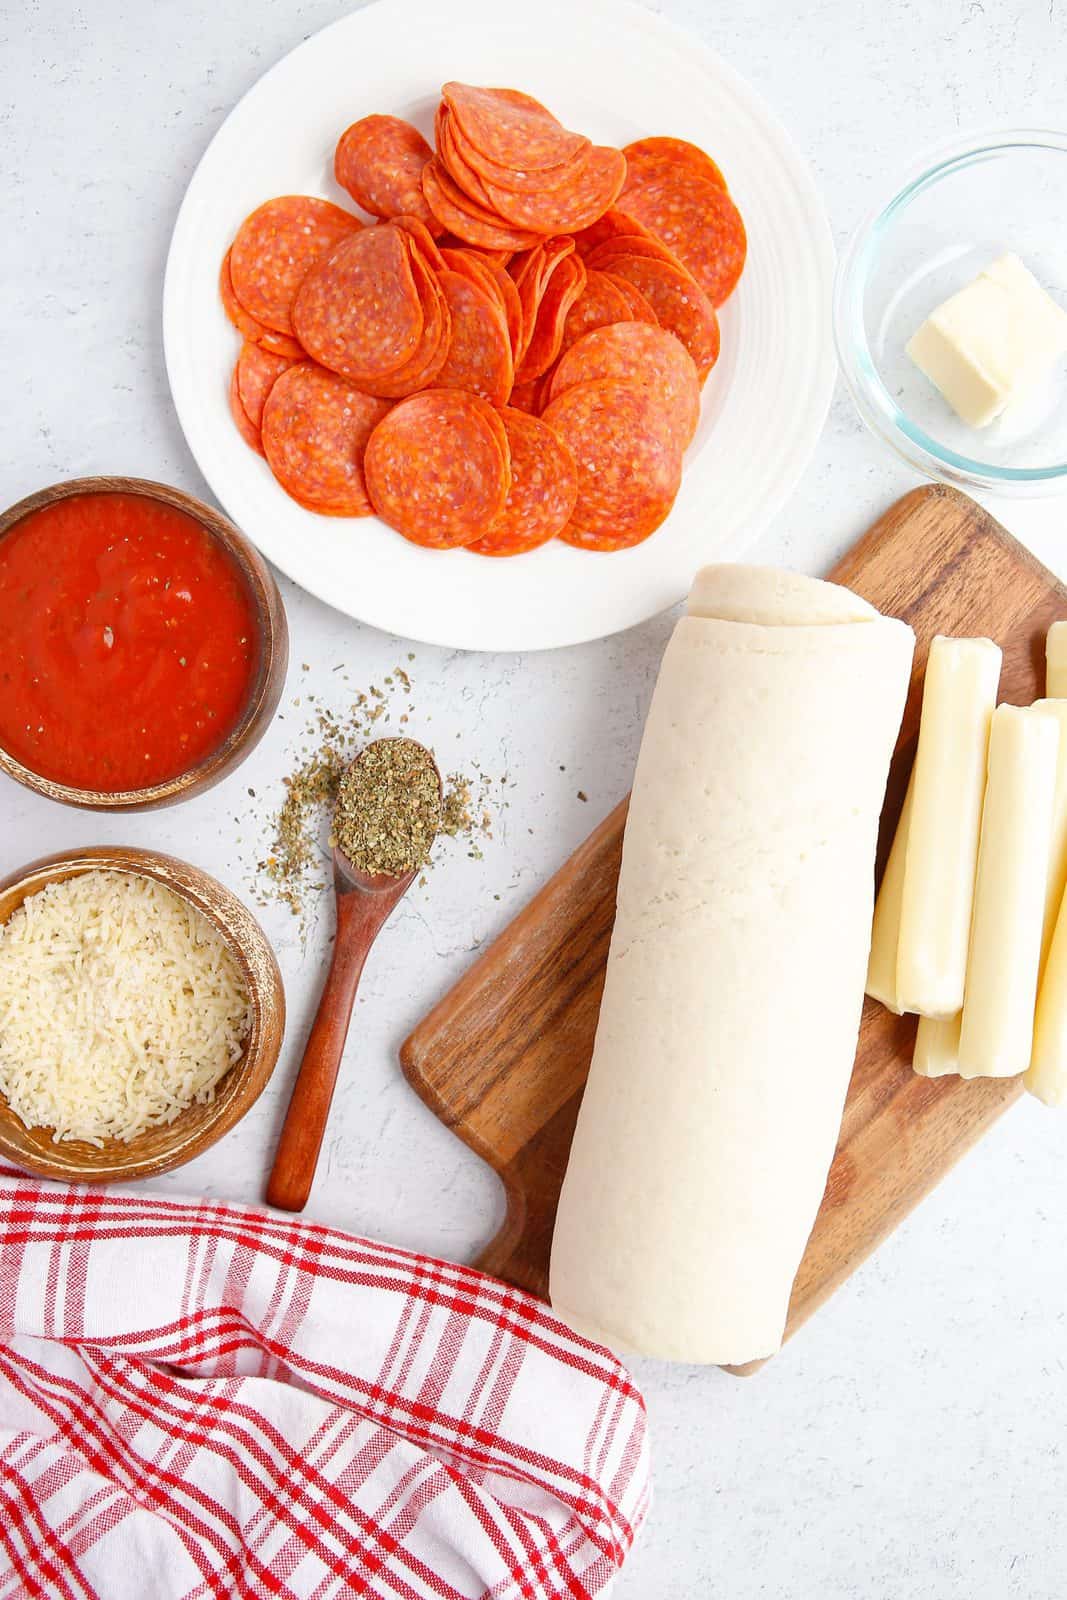 Ingredients needed: prepared pizza dough, pepperoni slices, mozzarella cheese sticks, unsalted butter, dried italian seasoning, parmesan cheese, parsley, marinara sauce and cooking spray.